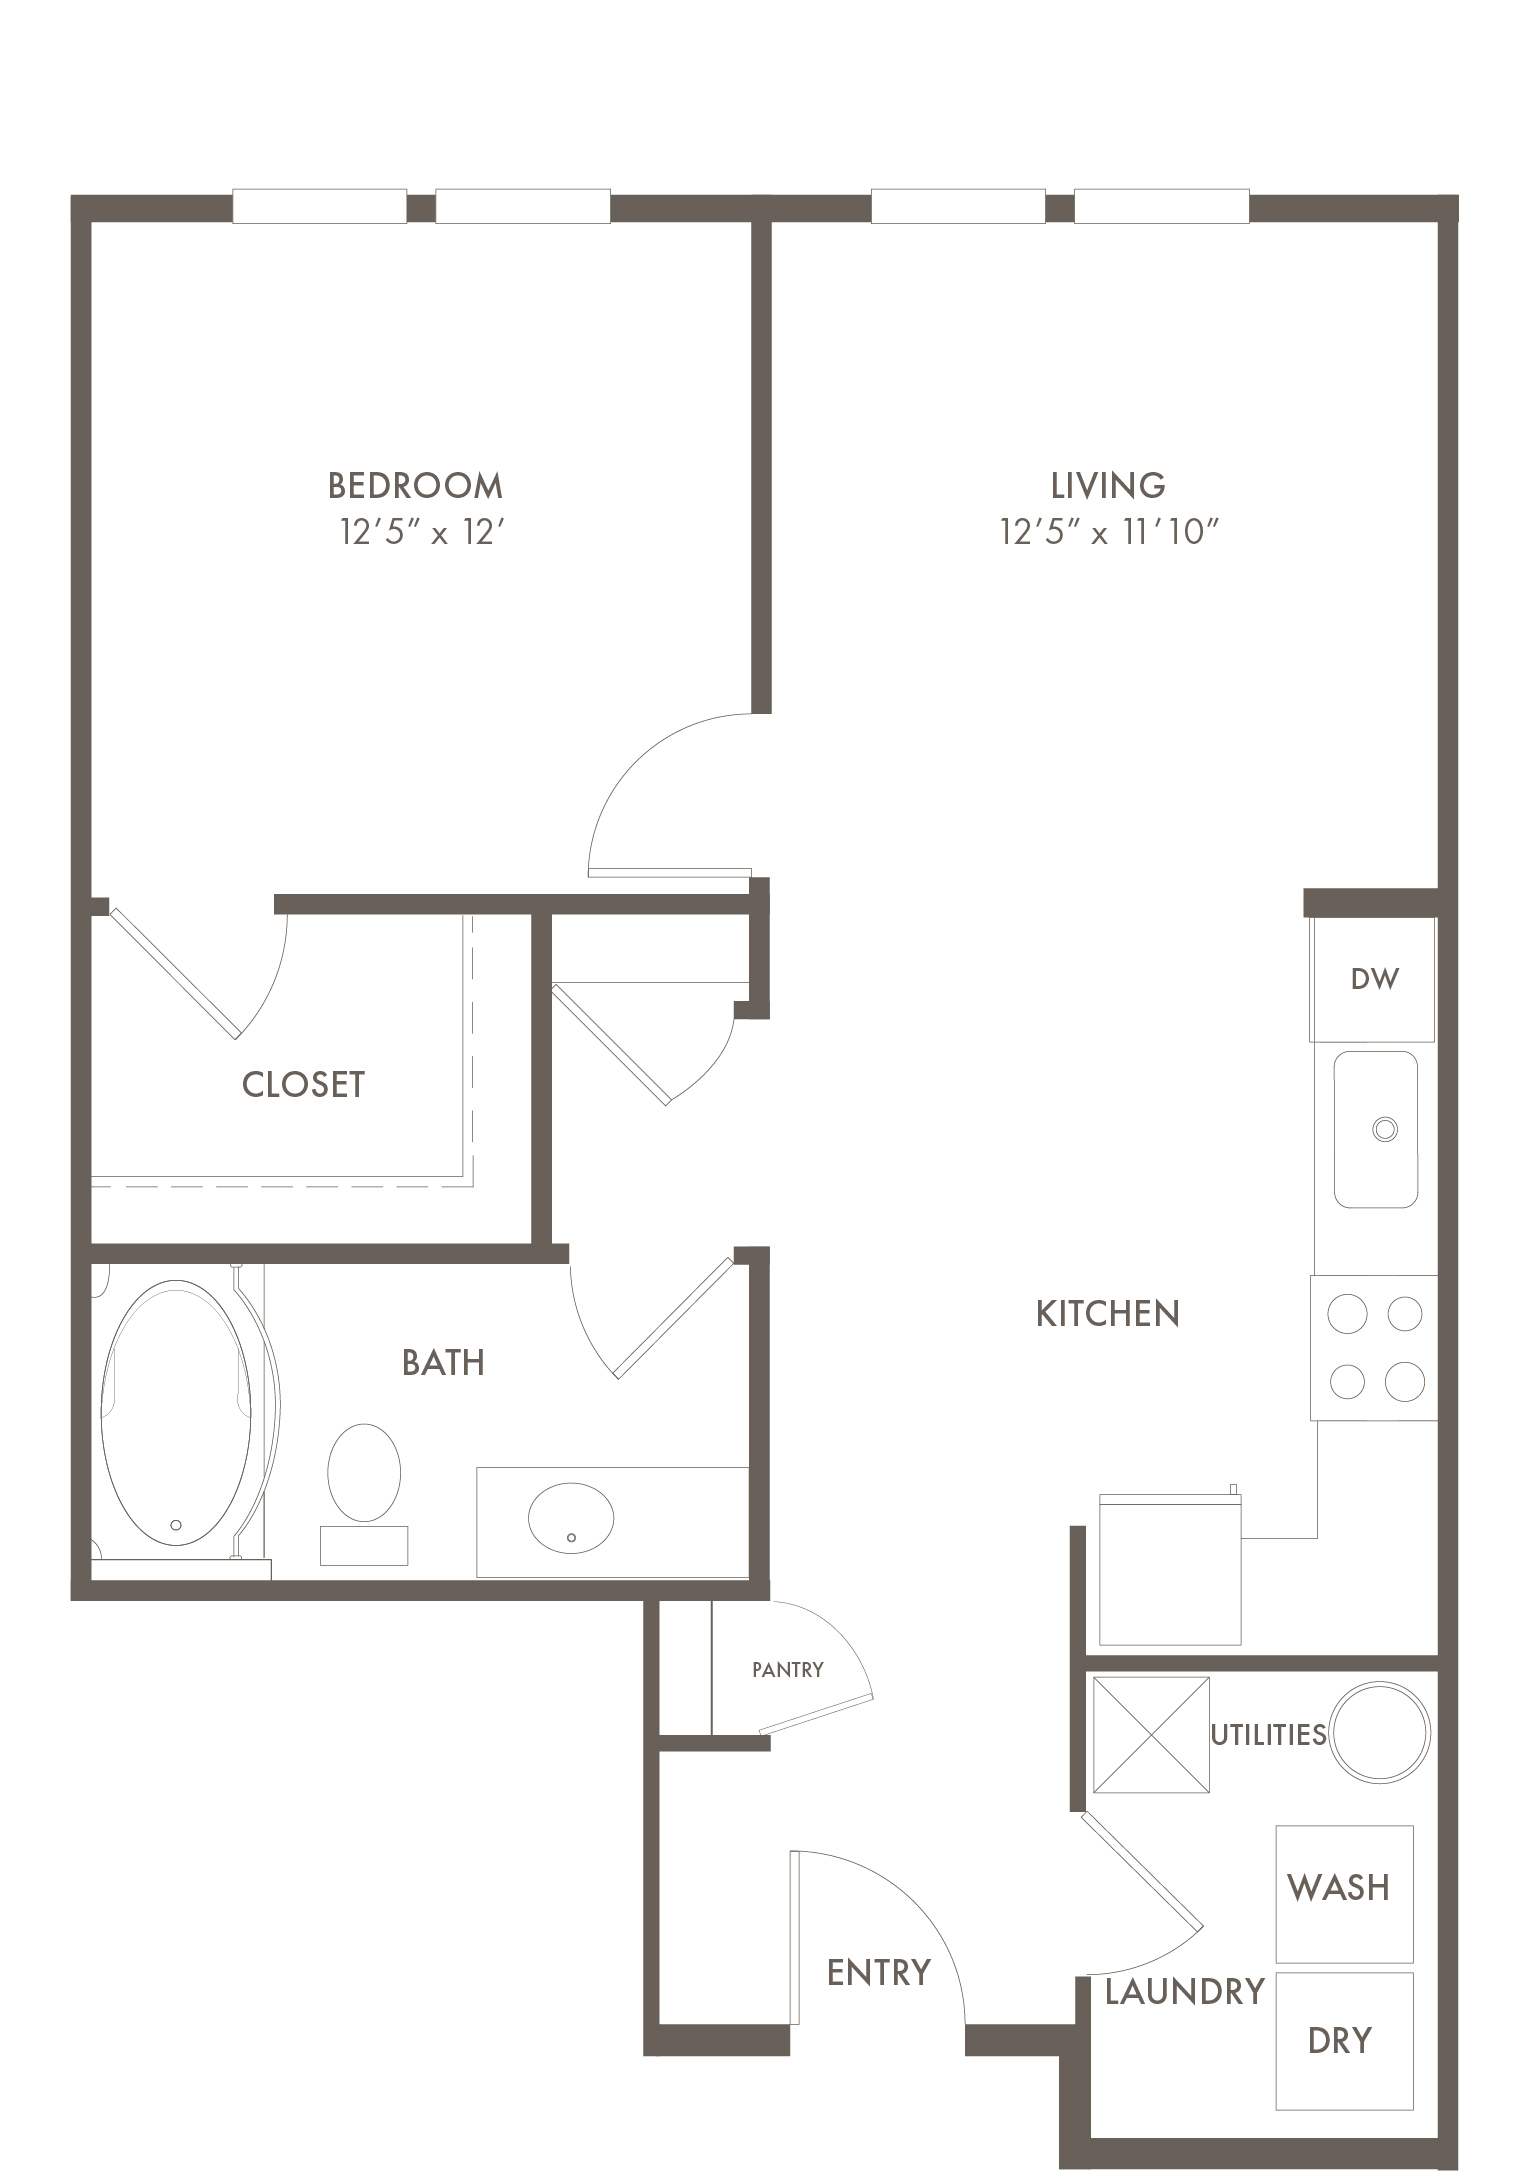 A AS1 unit with 1 Bedrooms and 1 Bathrooms with area of 707 sq. ft